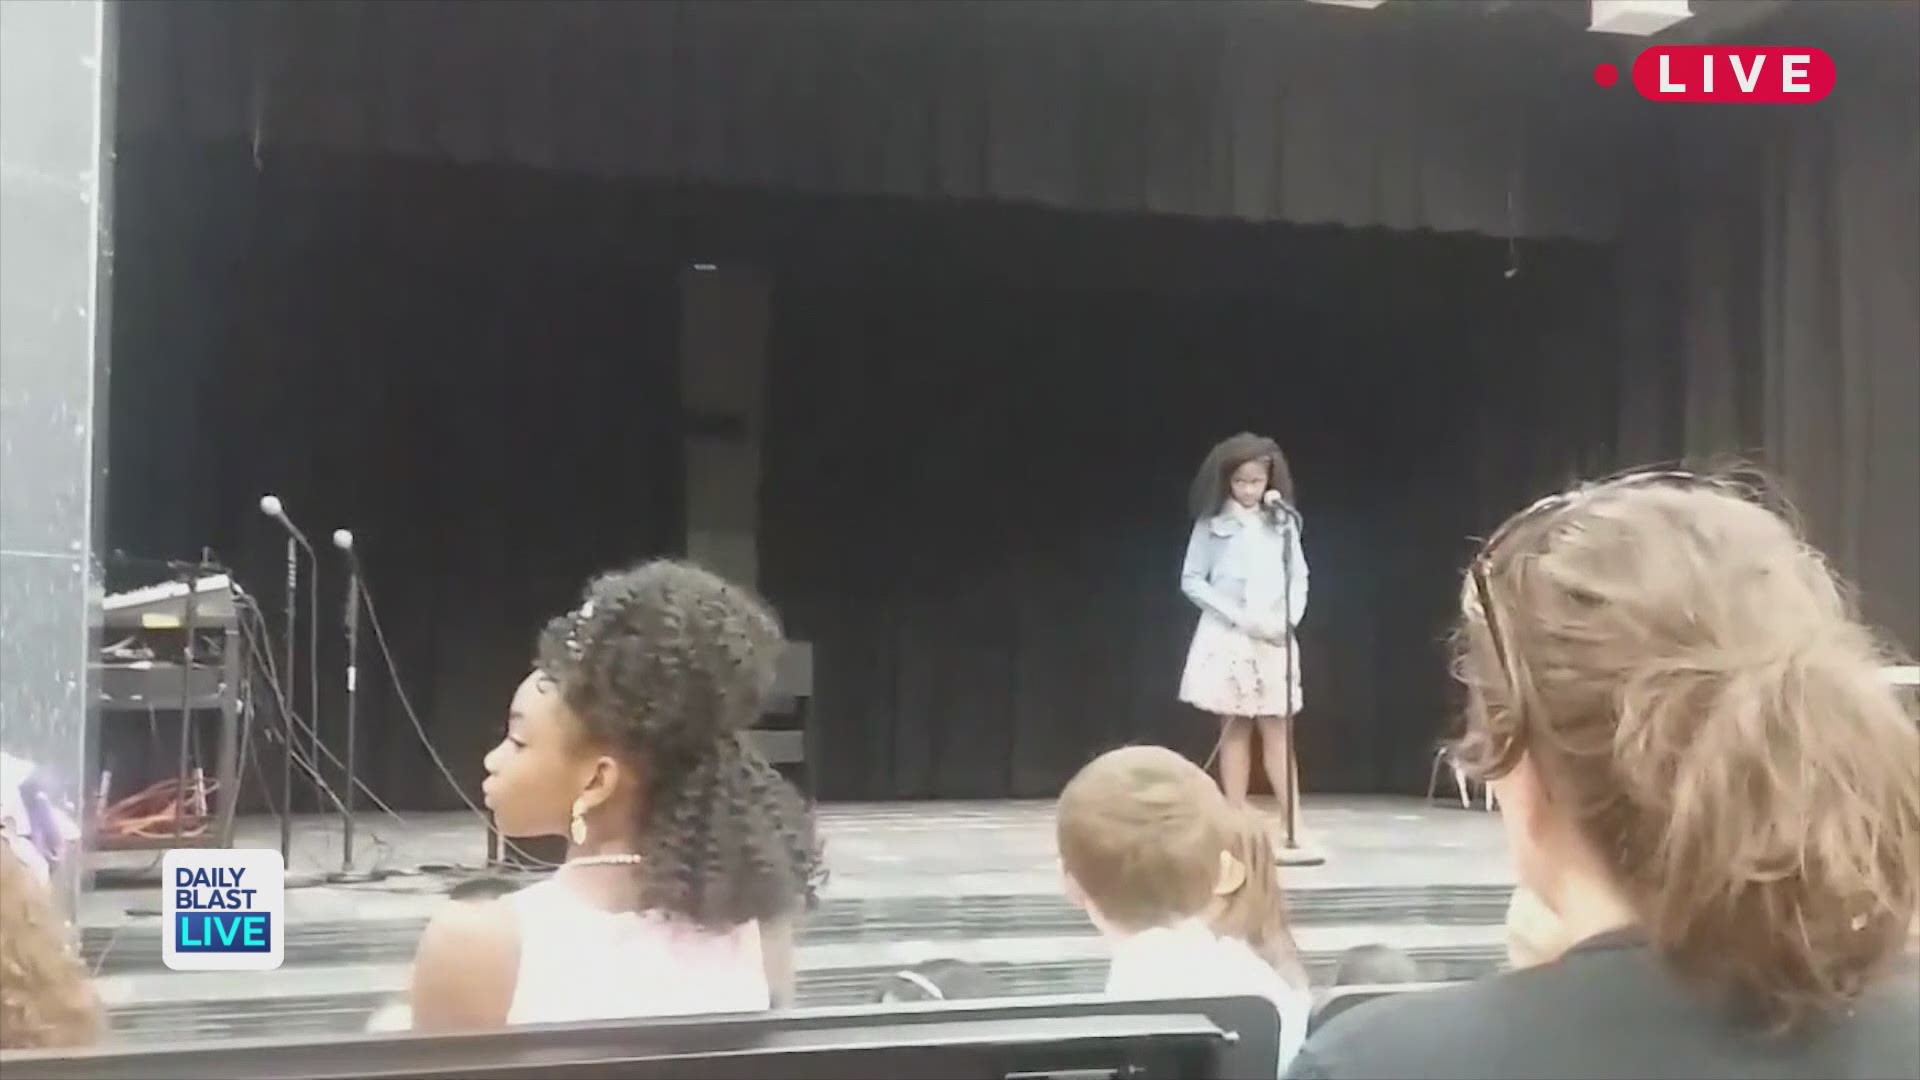 Shay Washington just wanted to help her daughter who was battling stage fright during a school performance, but she never expected the viral reactions to come! The video shows Washington walking onstage and holding her daughter after she paused during a p